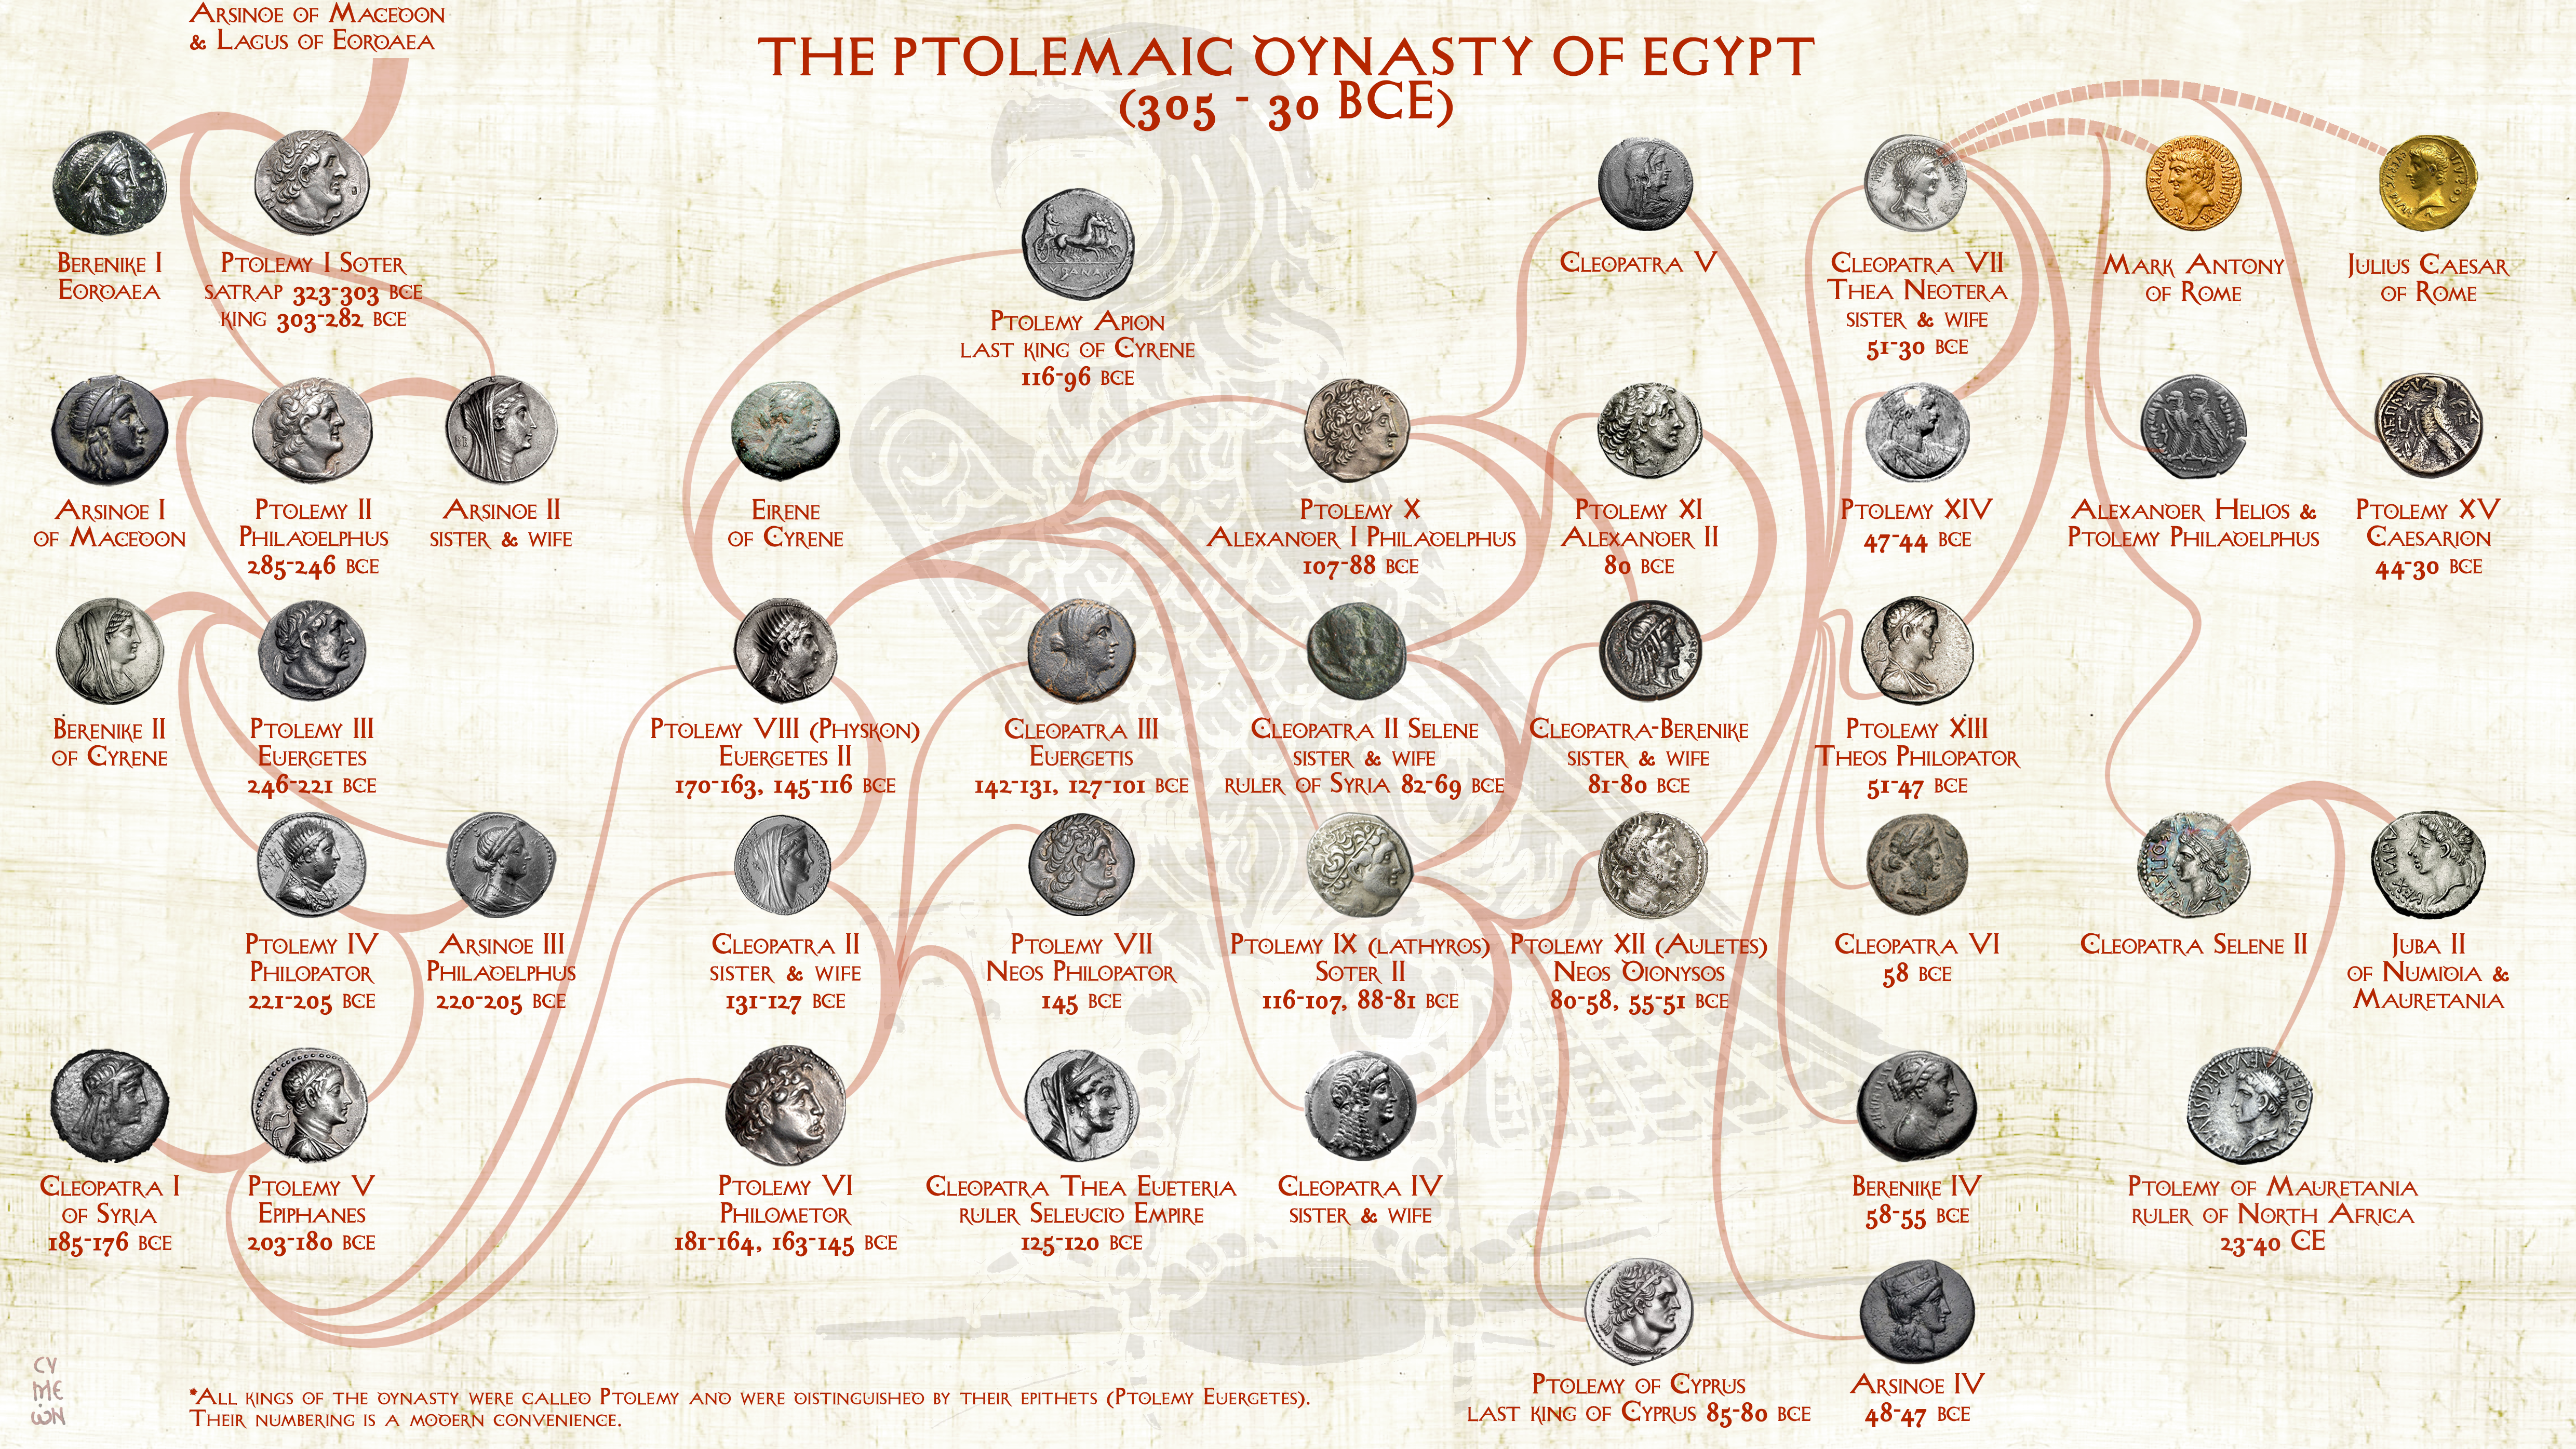 Rule of Ptolemy II (Philadelophos) In Egypt - Egypt History, Where the  whole story begins : Greek History of Egypt : 